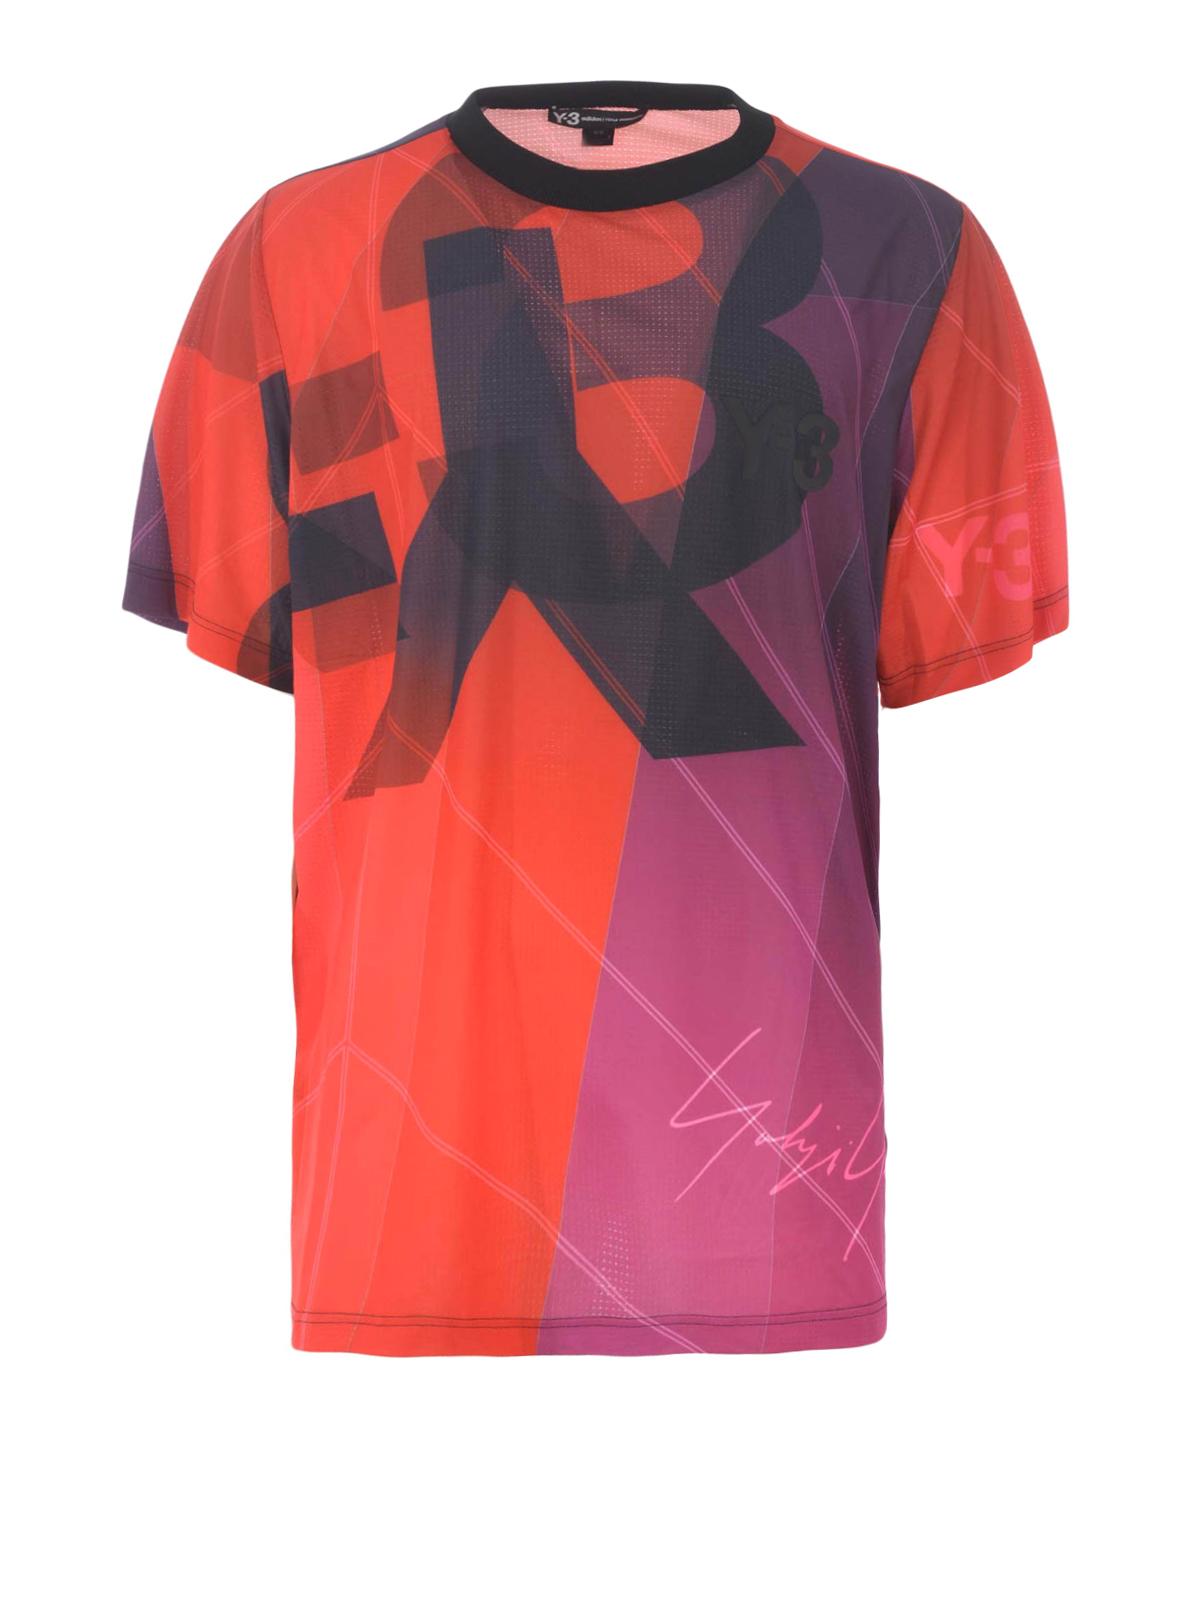 Y-3 Aop Football Red T-shirt for Men - Lyst